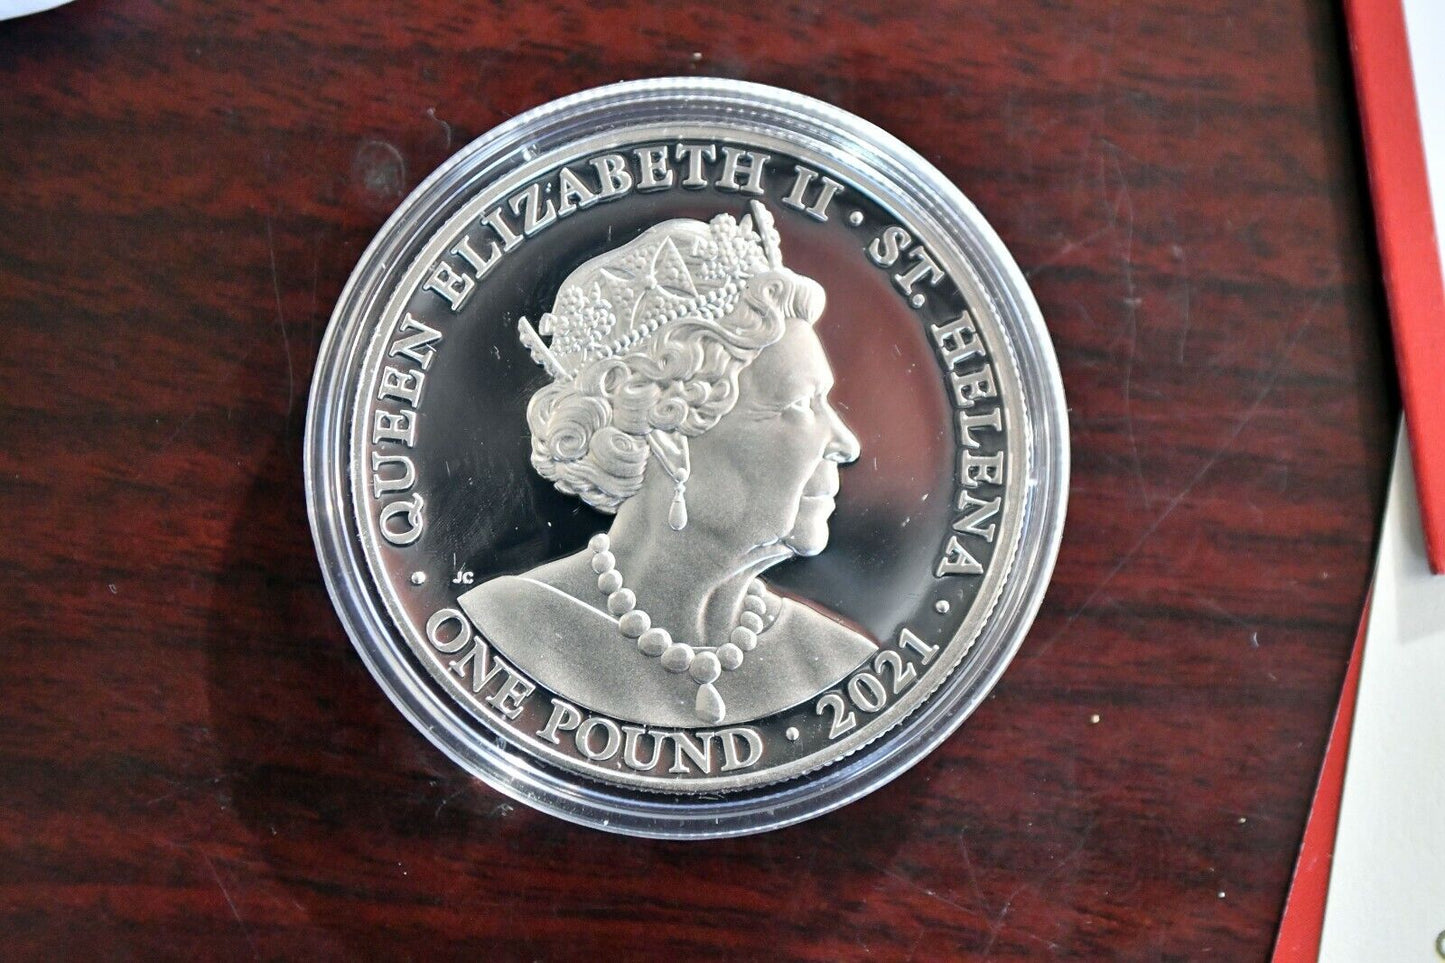 2021 East India Company "Truth" .999 Fine Silver 1 troy oz. Proof One Pound Coin